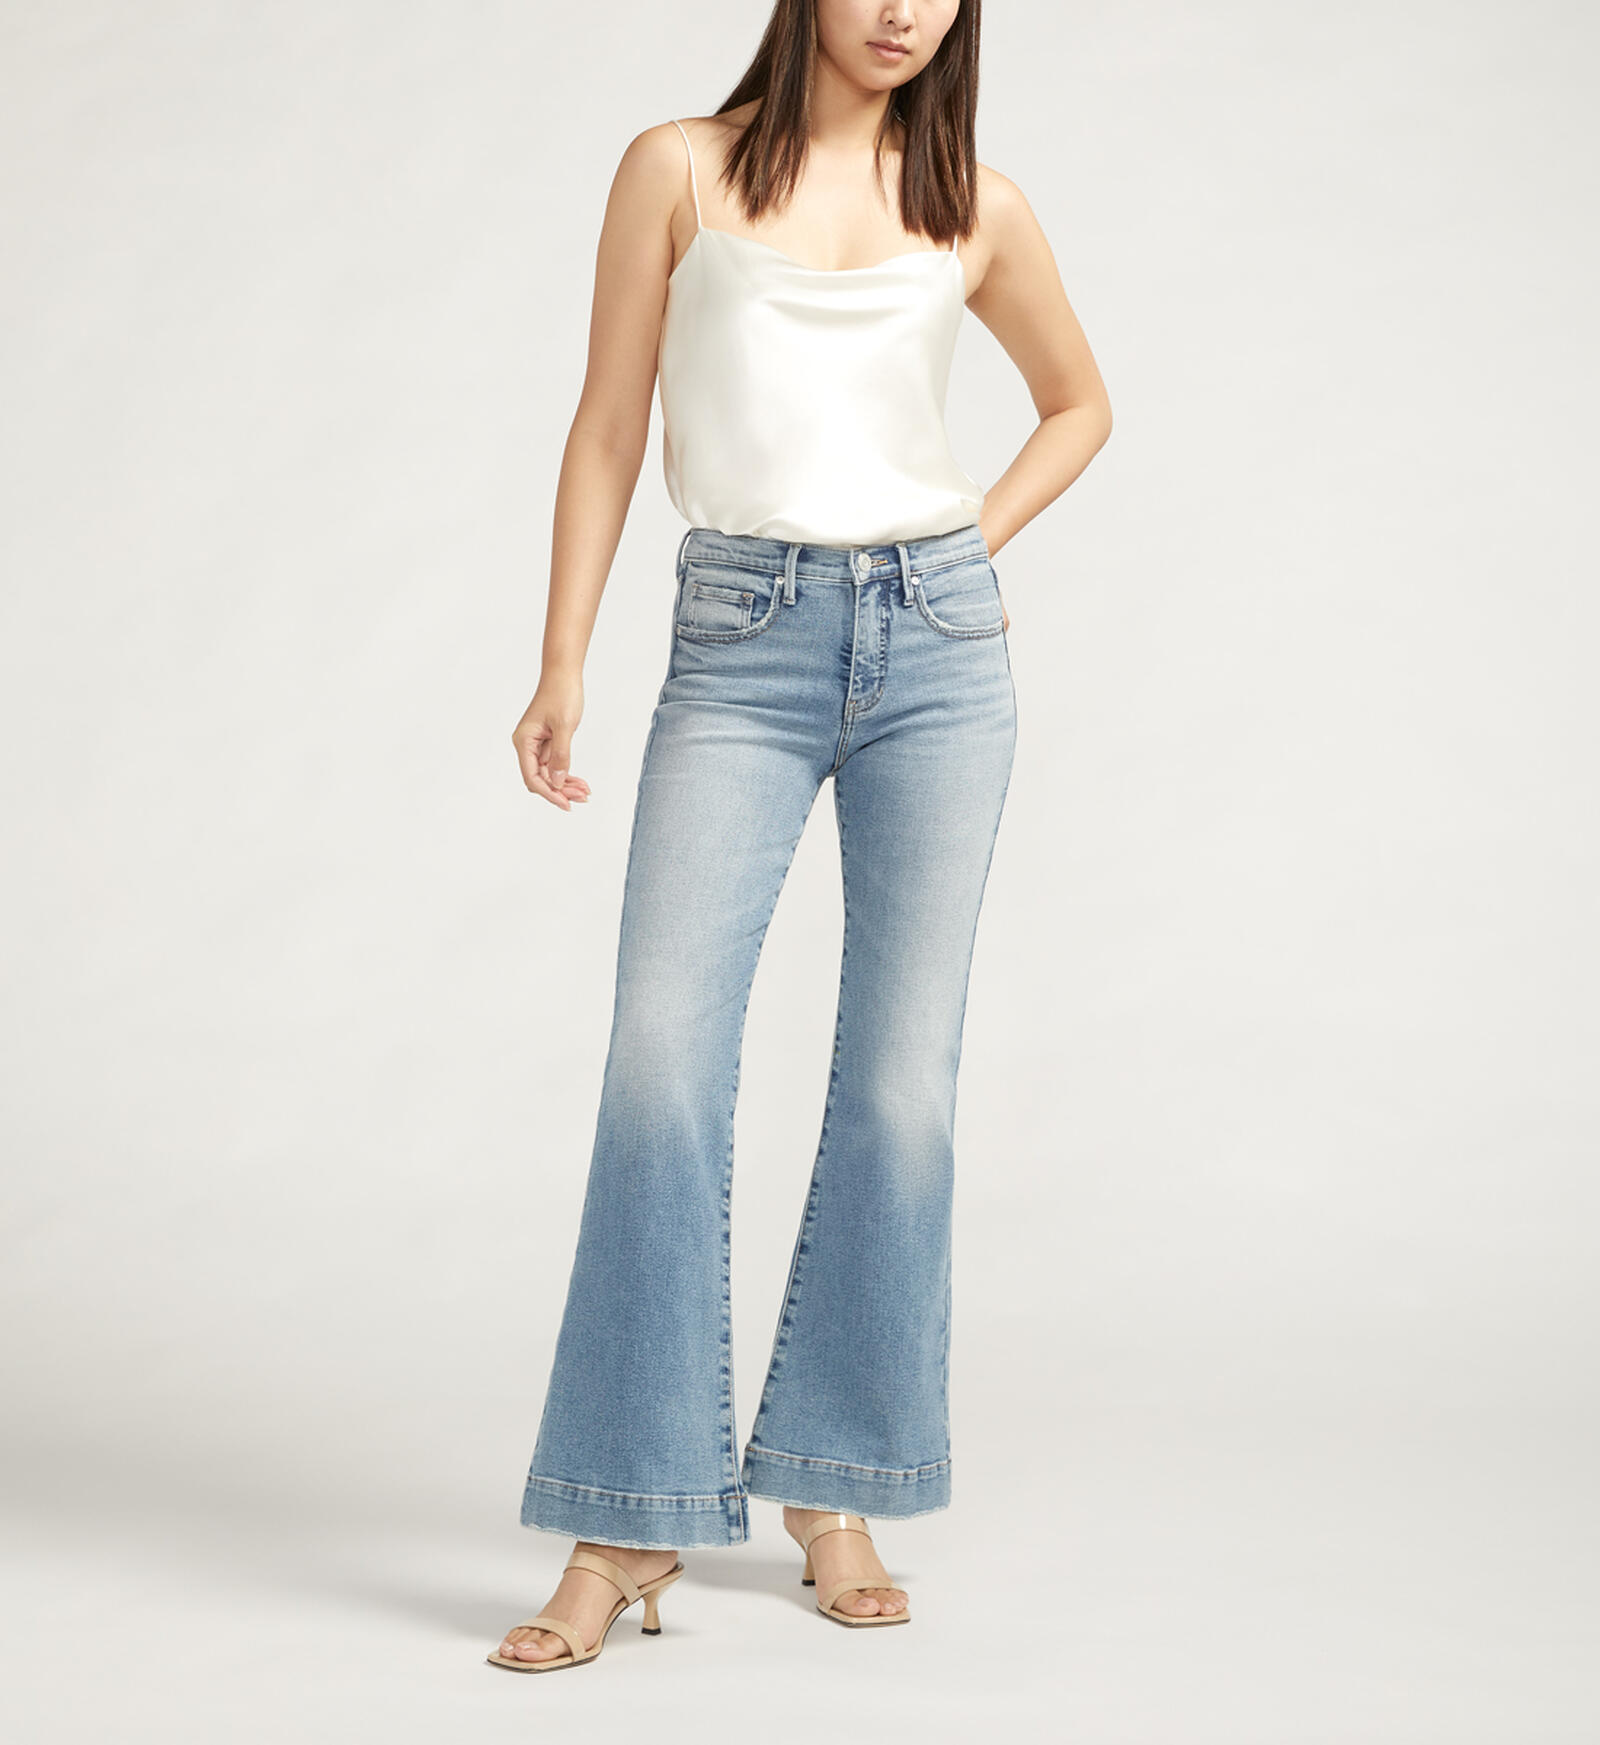 Buy Kait Mid Rise Flare Leg Jeans for USD 88.00